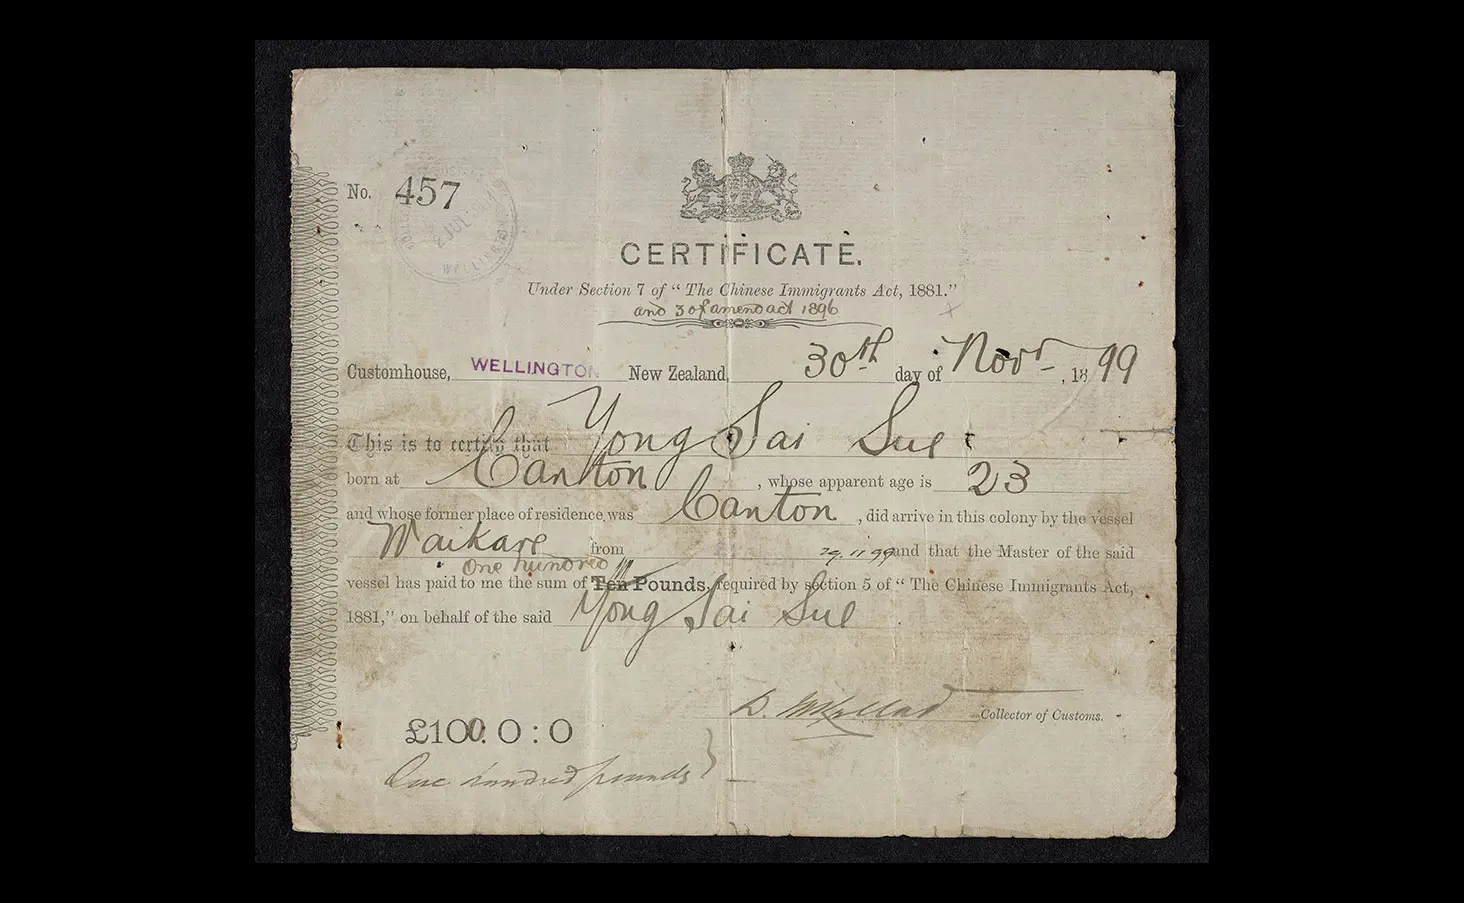 Photo of a poll tax certificate dated 30 November 1899 for Yong Sai Sue, 23 years old who was born at Canton and arrived in NZ on the ship ‘Waikare’. Tax paid was £100.